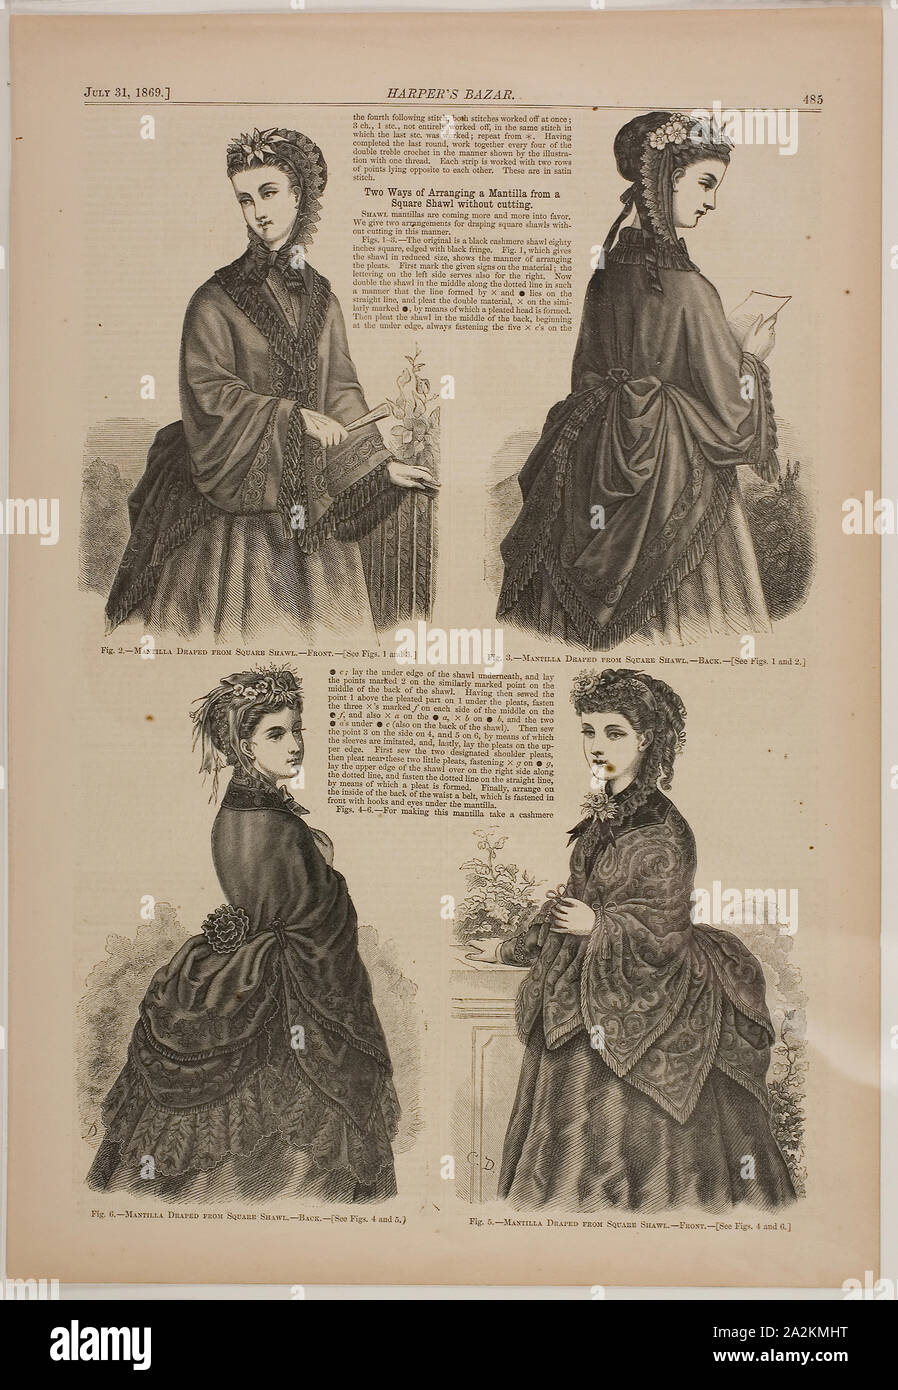 What Shall We Do Next?, published July 31, 1869, Winslow Homer (American, 1836-1910), published by Harper’s Bazar (American, founded 1867), United States, Wood engraving on paper, 231 x 348 mm (image), 281 x 410 mm (sheet Stock Photo